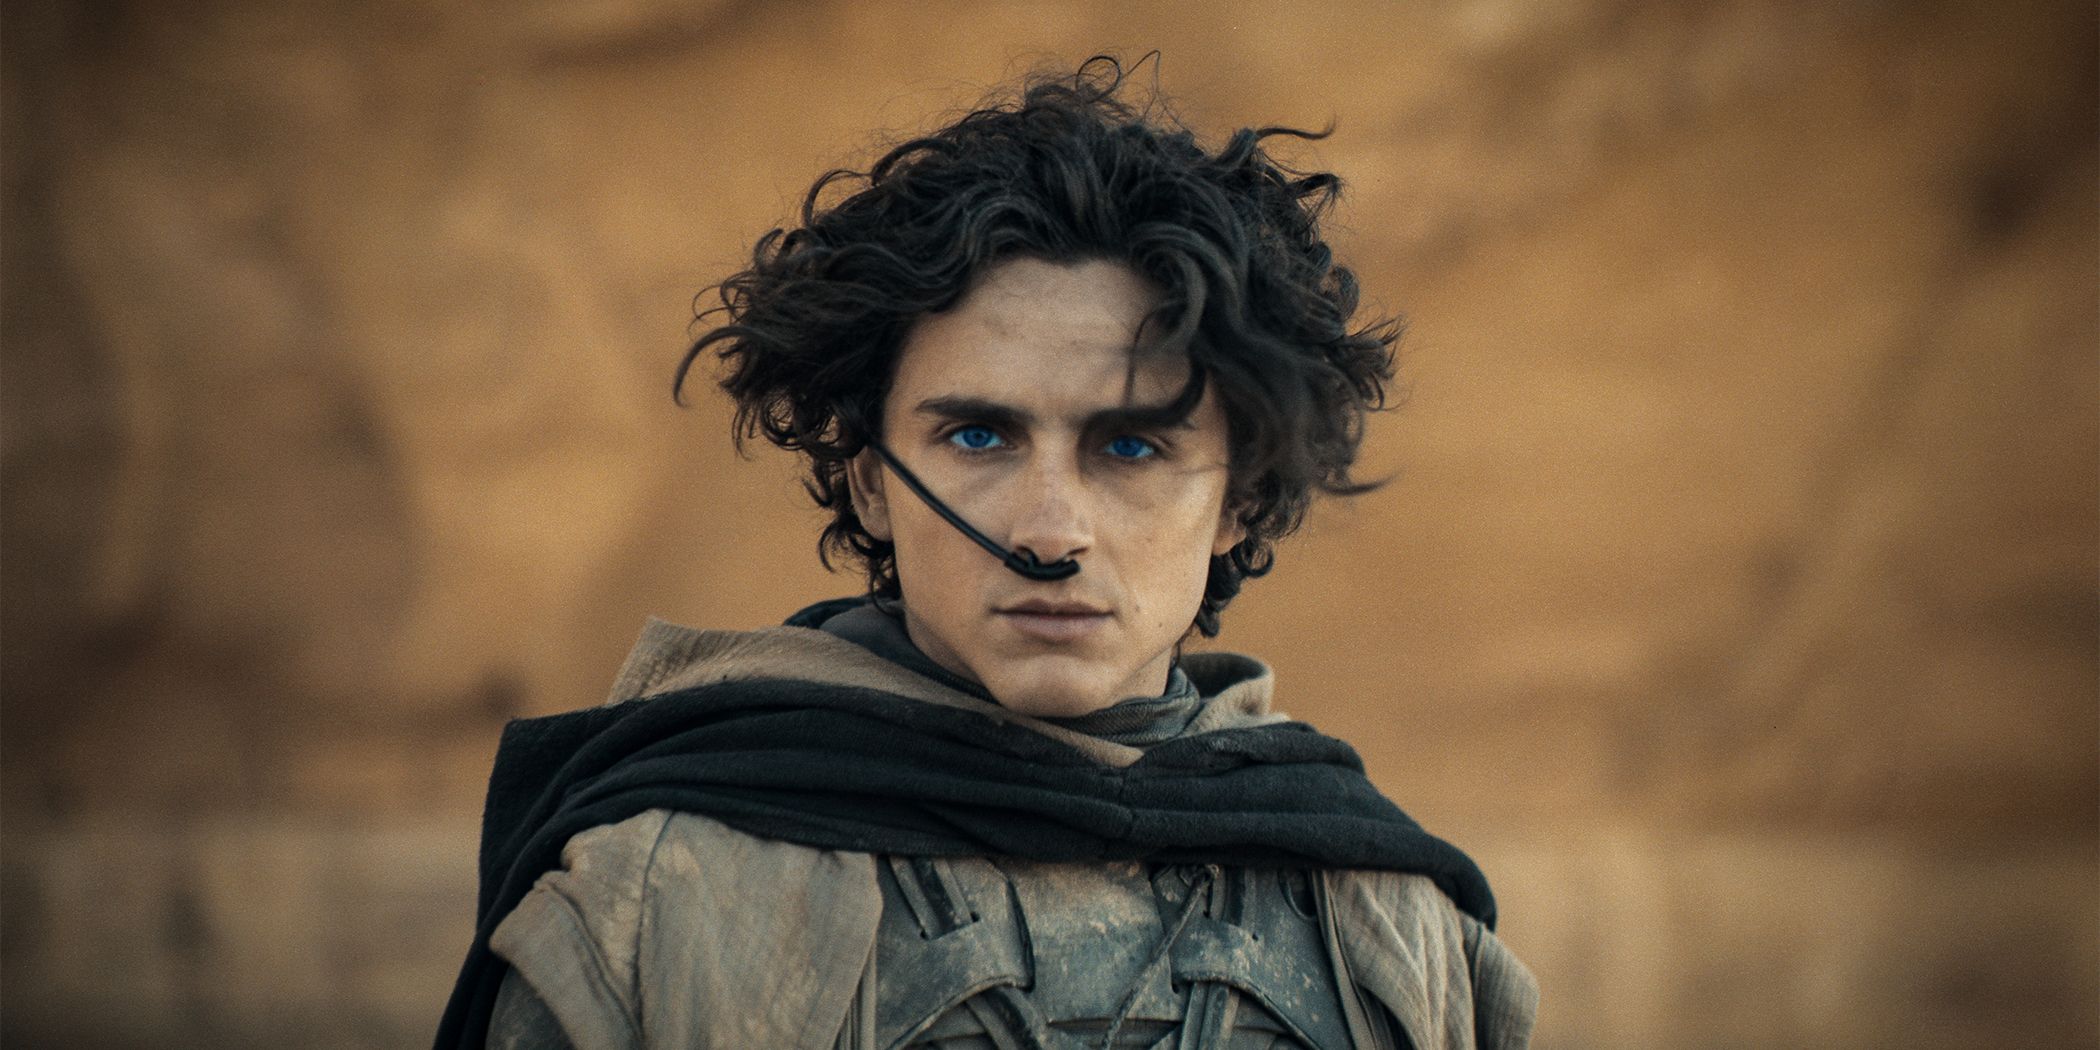  Timothée Chalamet looking intensely into the camera as Paul Atreides in Dune: Part Two